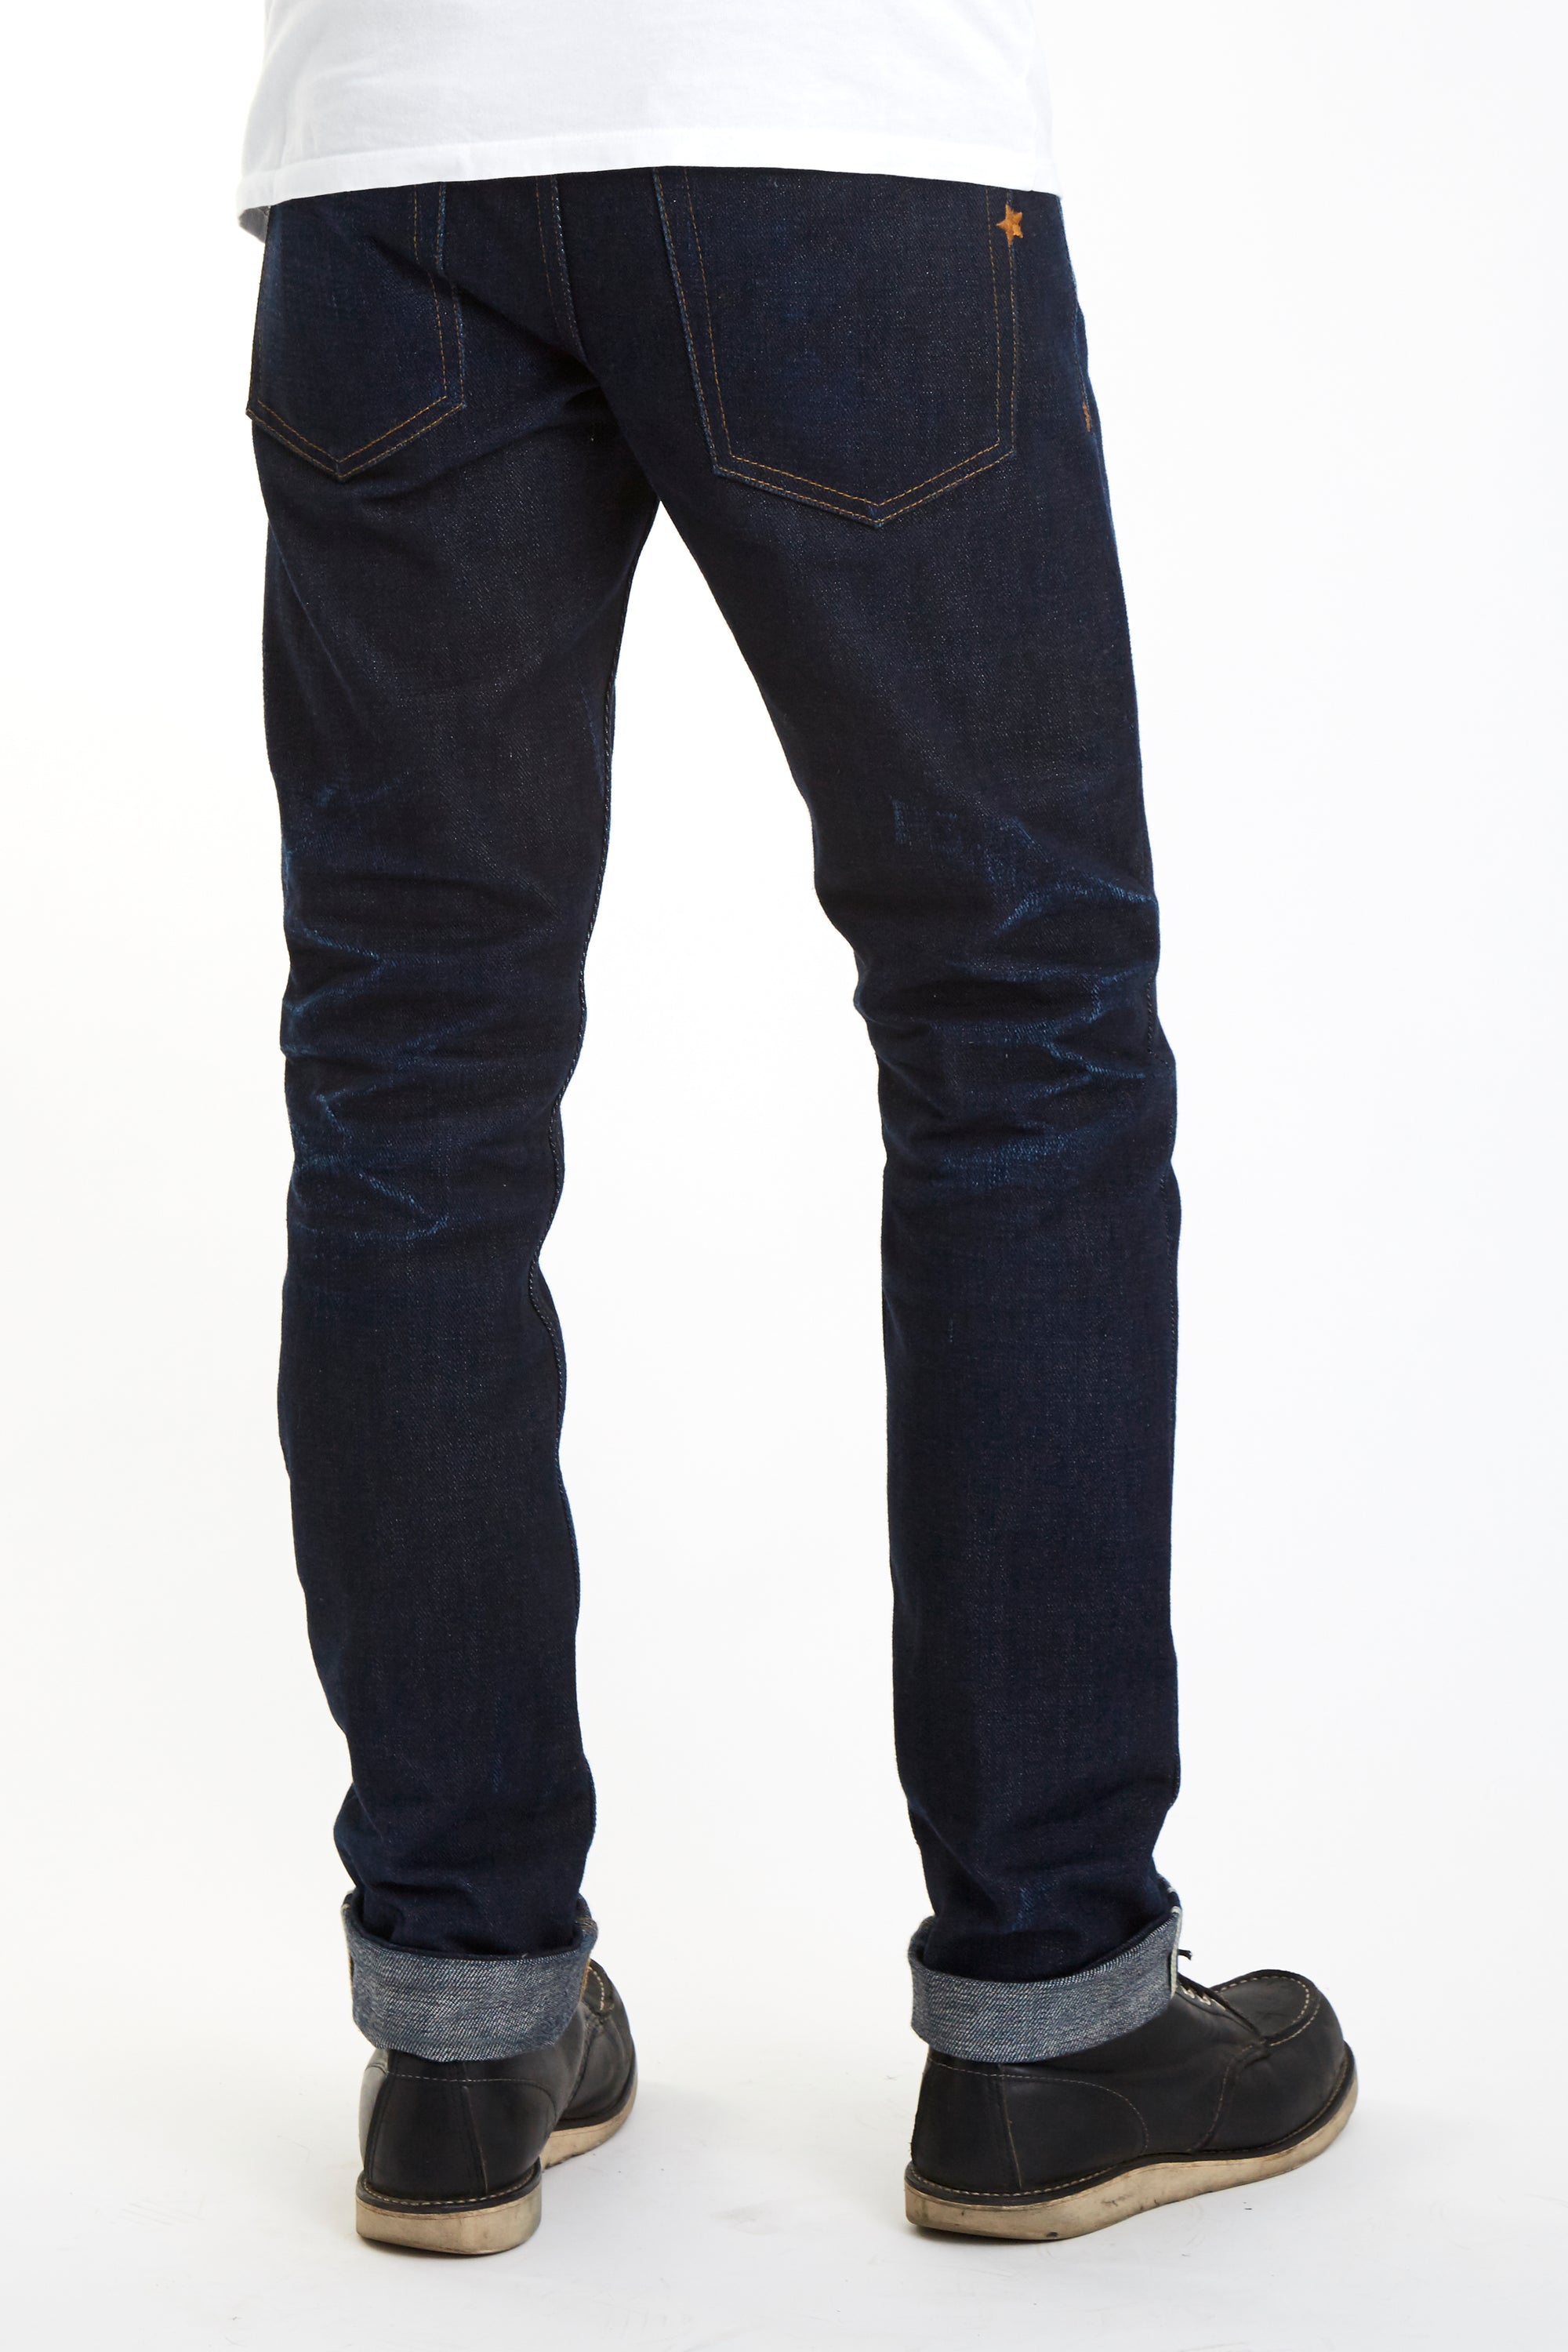 Cone Mills & Japanese Raw Selvage Denim Jeans Tagged 15oz Indigo Selvage  - Brave Star Selvage